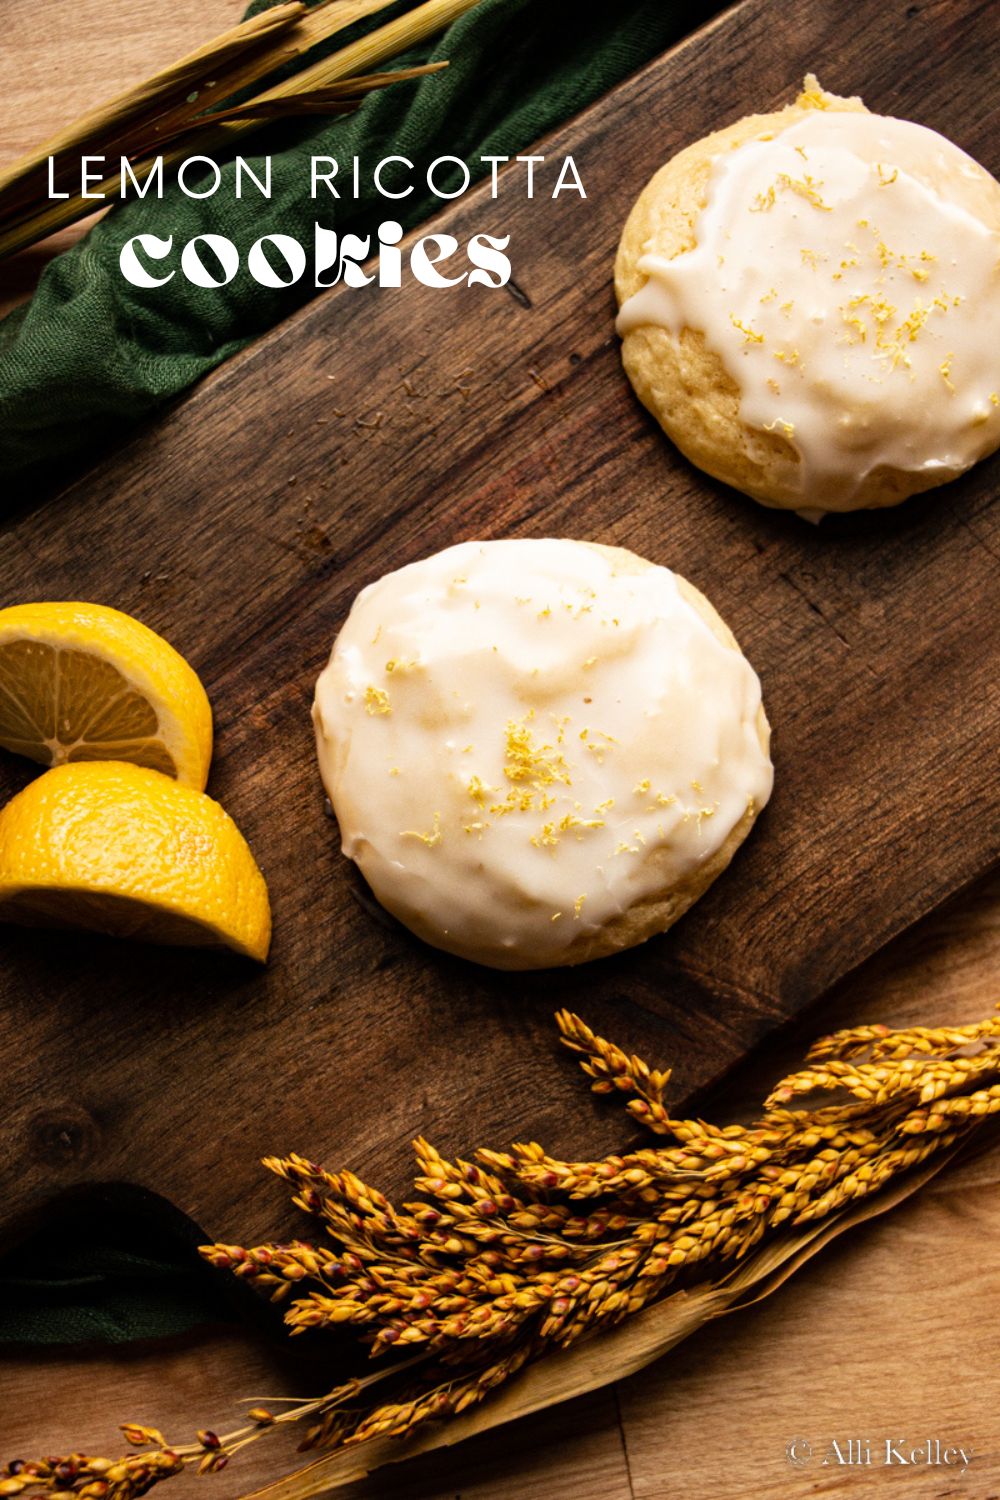 Soft on the inside and slightly crunchy on the outside, these lemon ricotta cookies truly are a treat. They combine creamy, rich ricotta cheese with bright and zesty lemons for an unforgettable flavor! It's just as well my recipe for glazed lemon cookies makes so many - you won't be able to have just one!